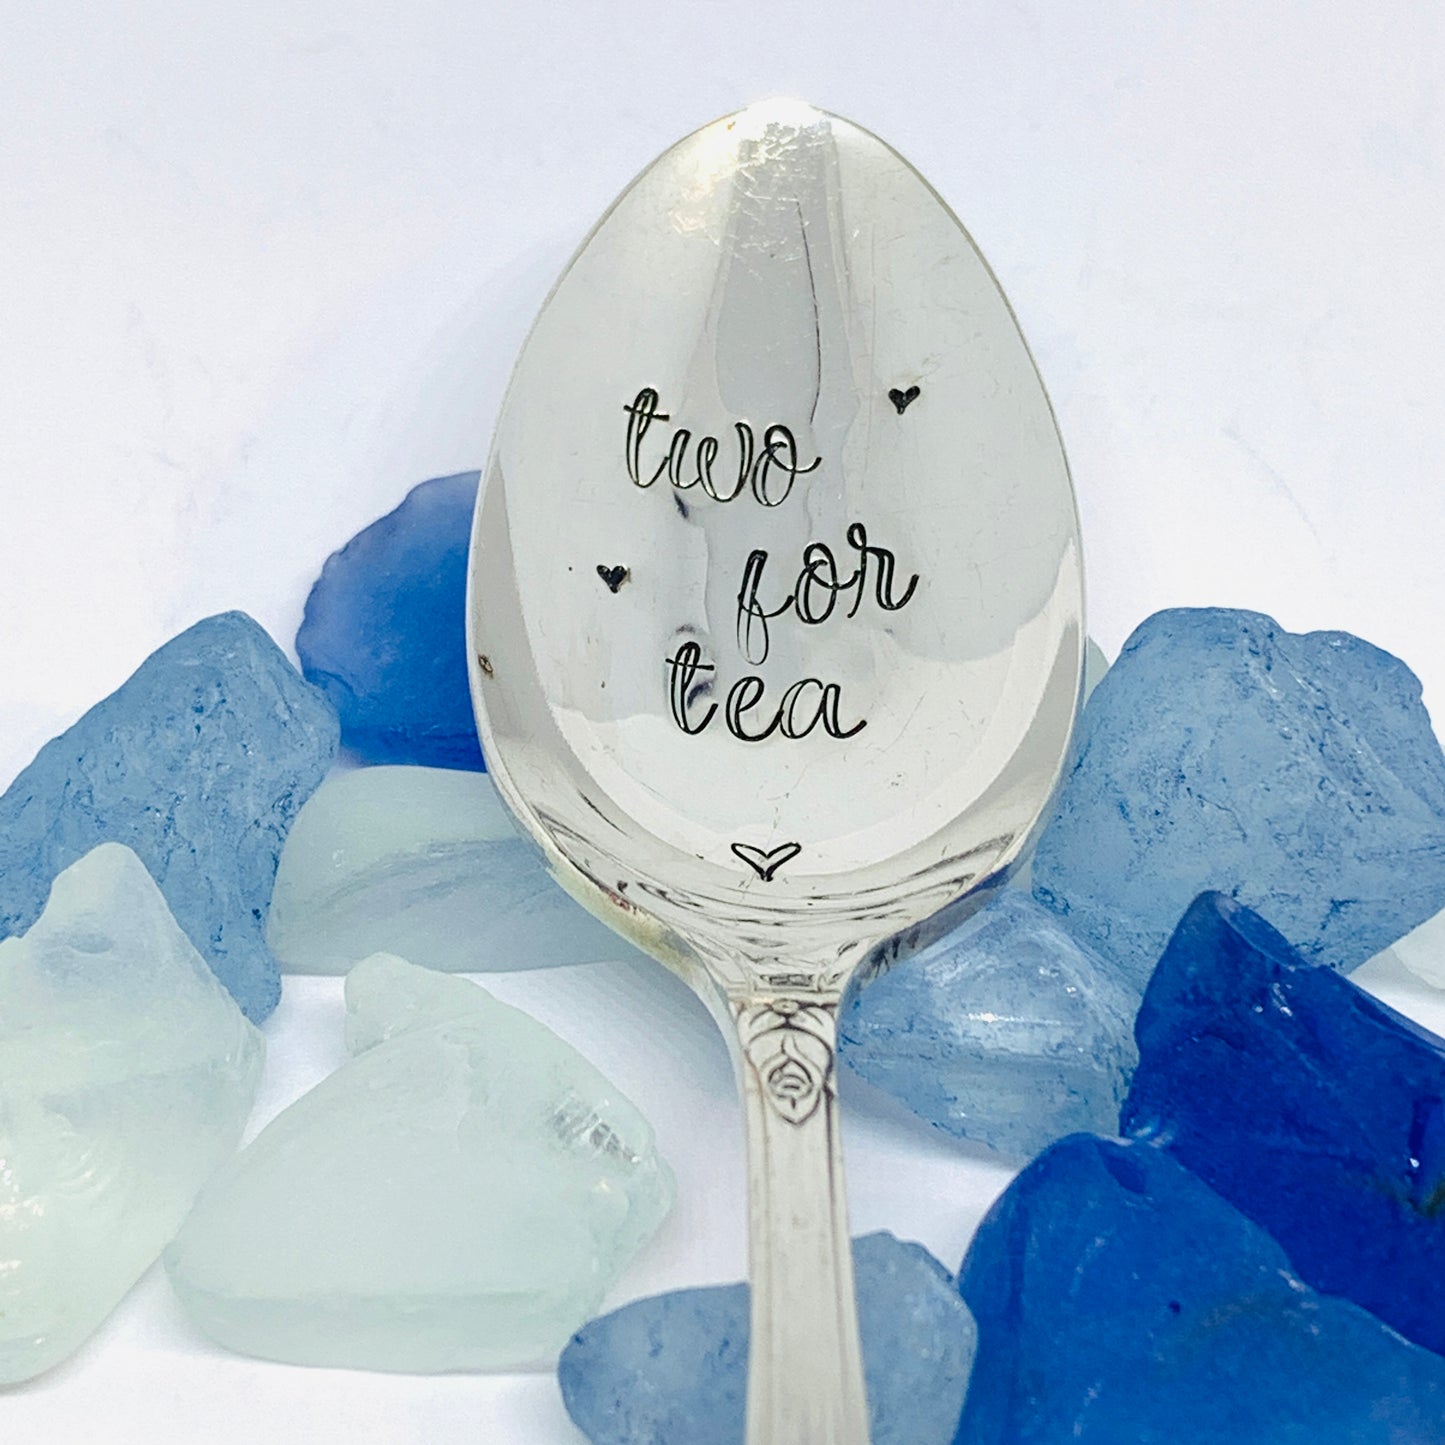 Vintage Silver Plated Hand Stamped Spoon | Novelty